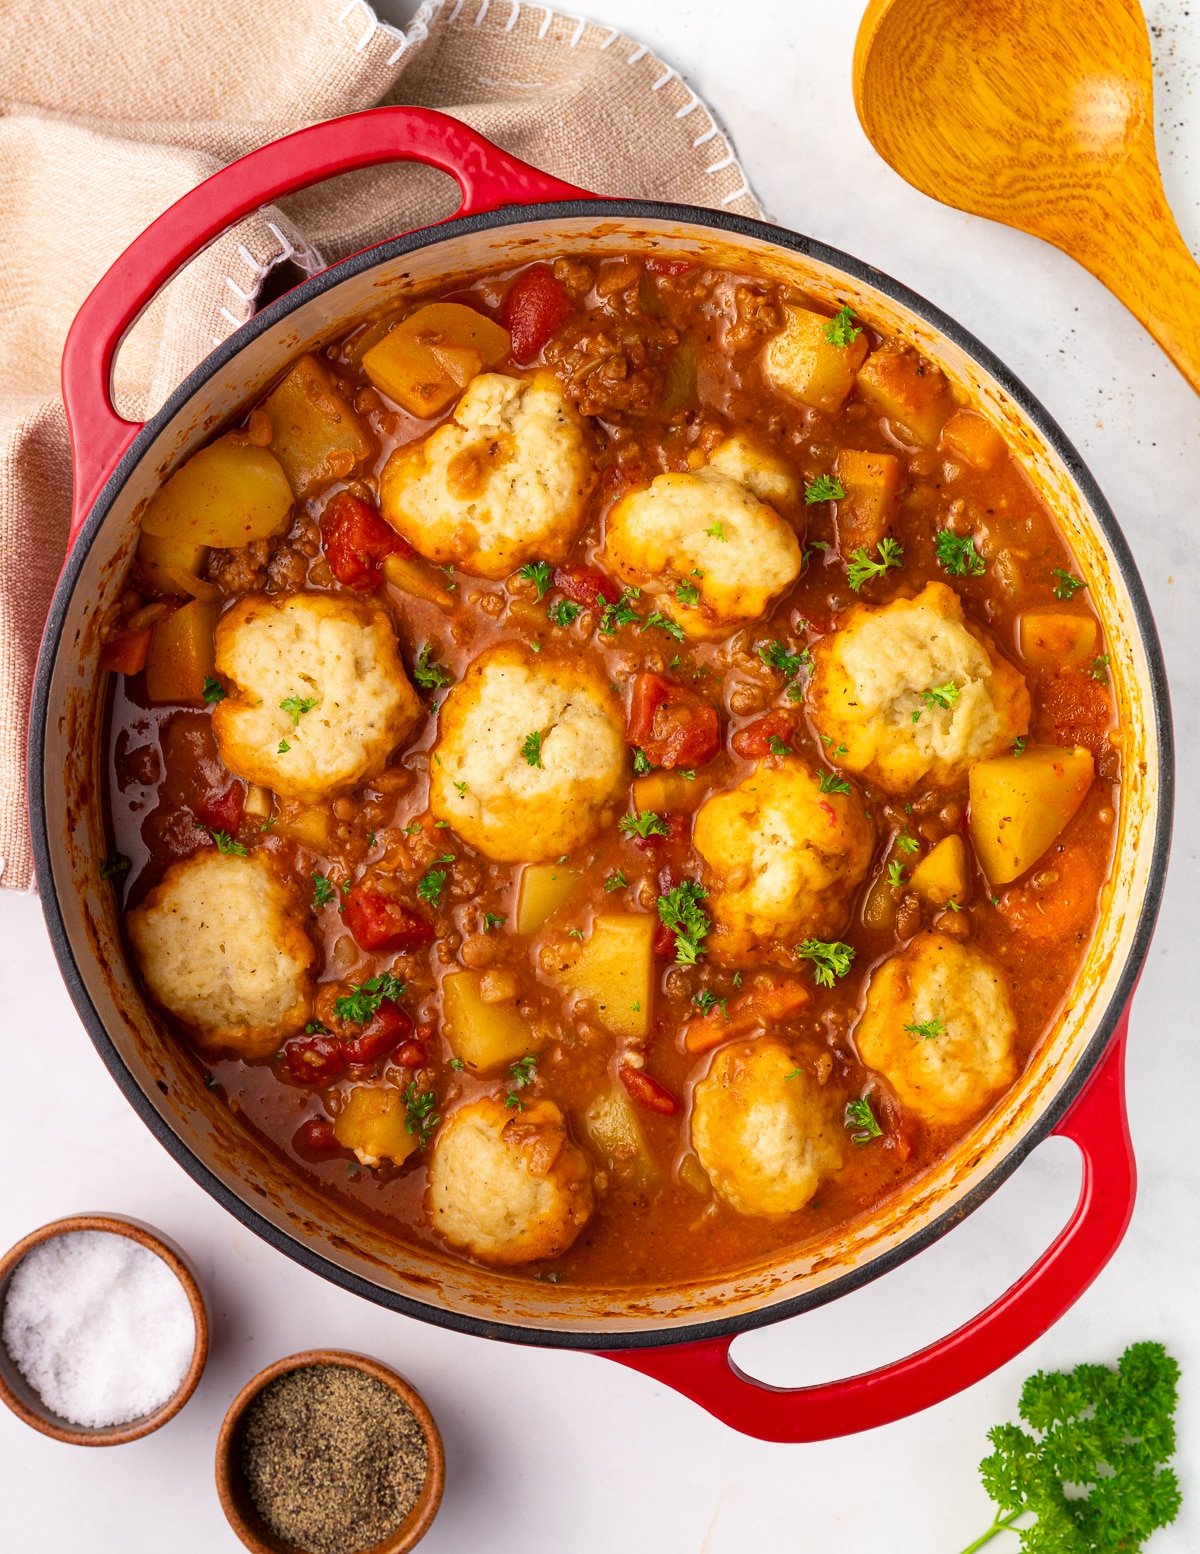  a big pot of stew with dumplings and parsley garnish